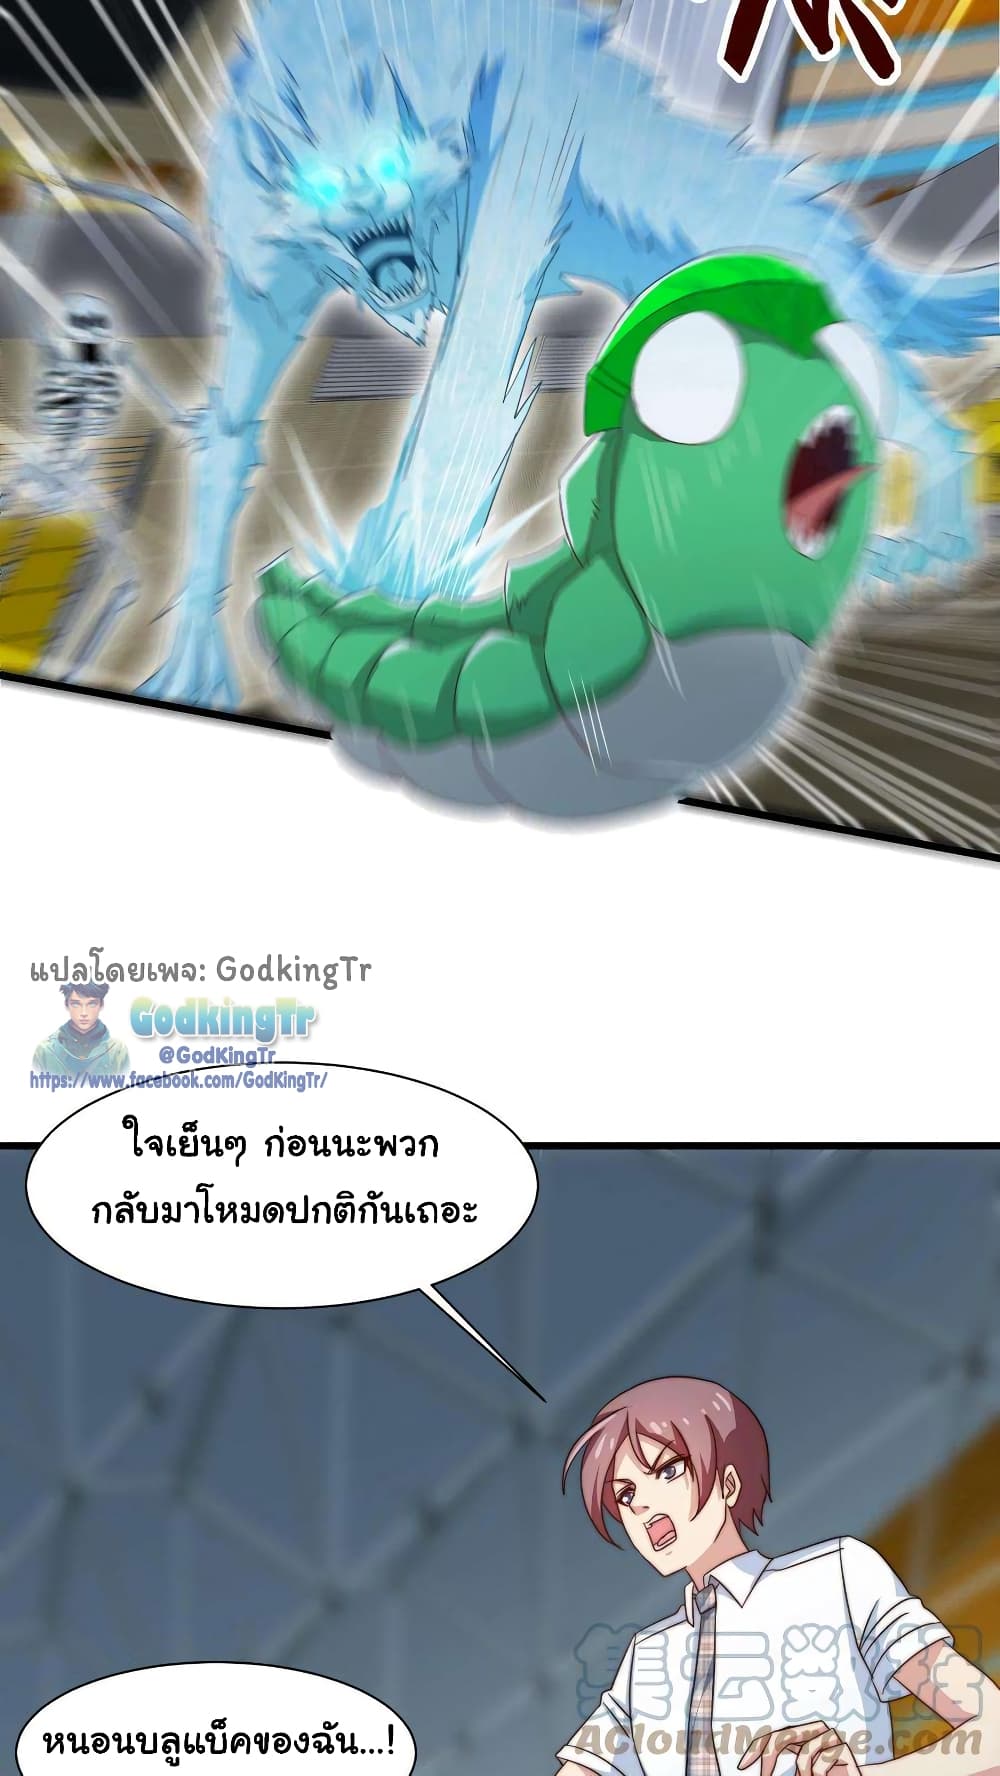 Is It Reasonable for Me to Beat a Dragon With a Slime? 2-บอกชื่อคนอื่นเพื่อลอบโจมตี